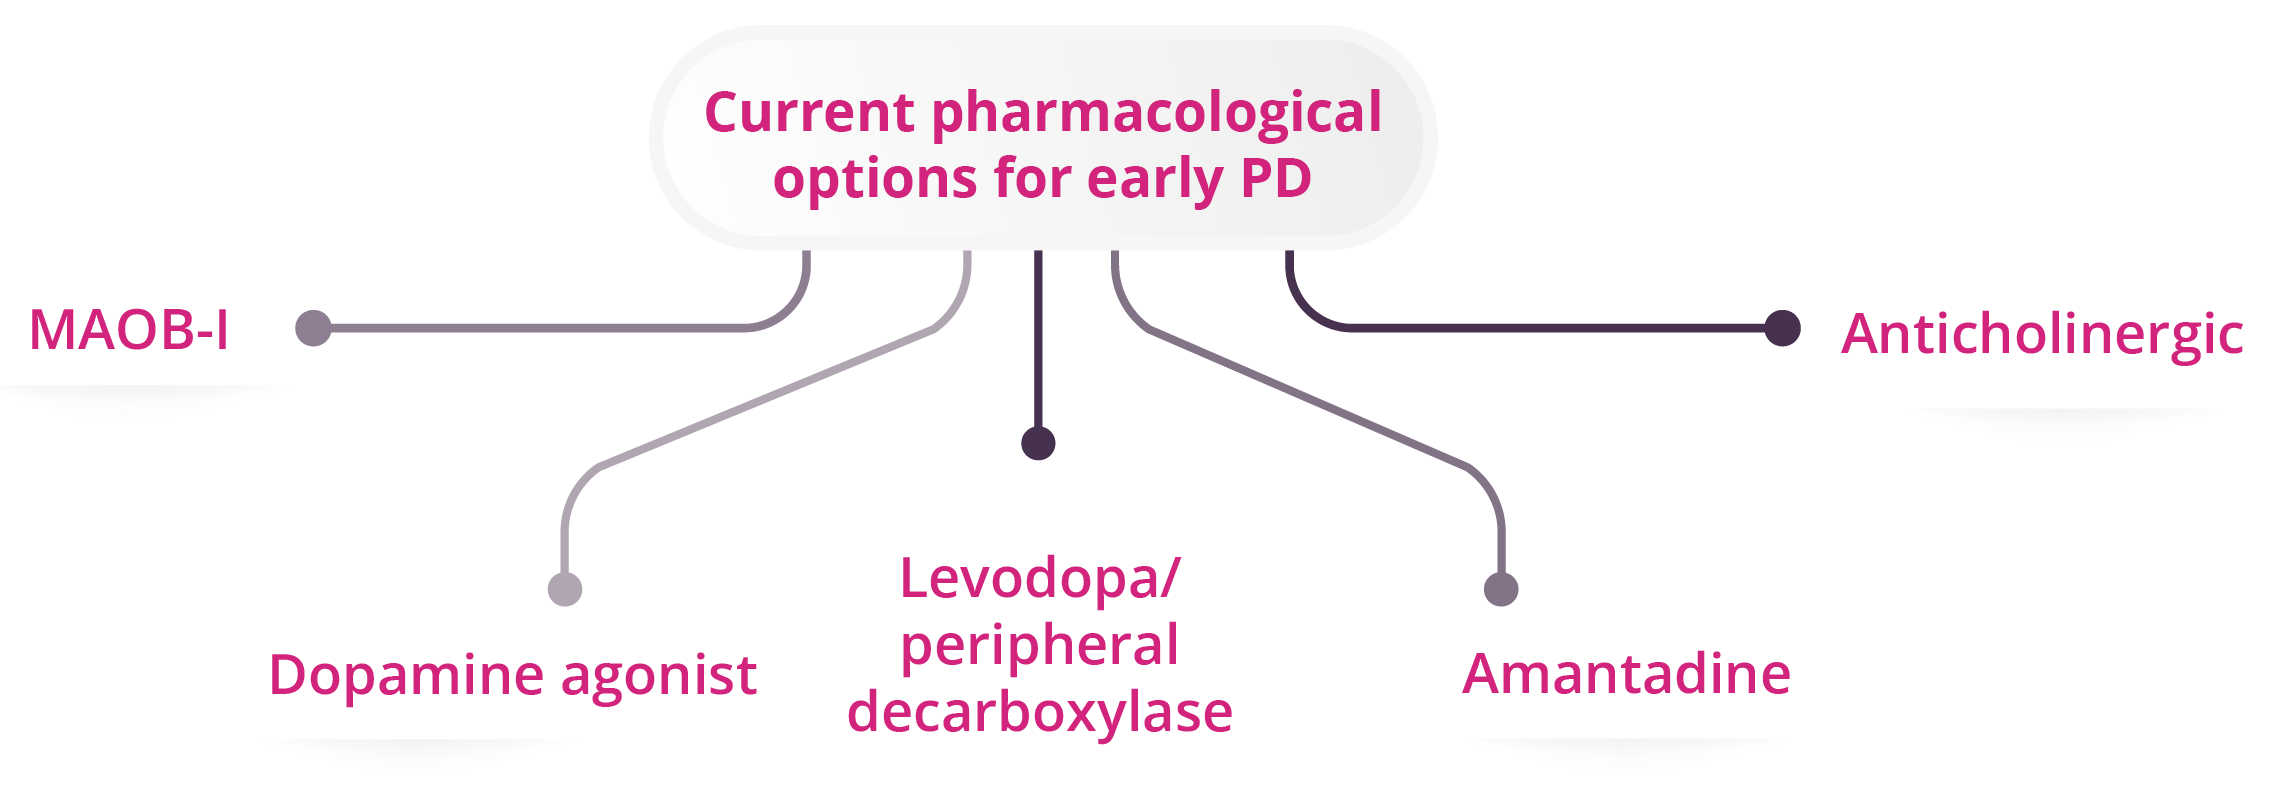 Five current pharmacological options for early PD such as MAOB-I, dopamine agonists and amantadine